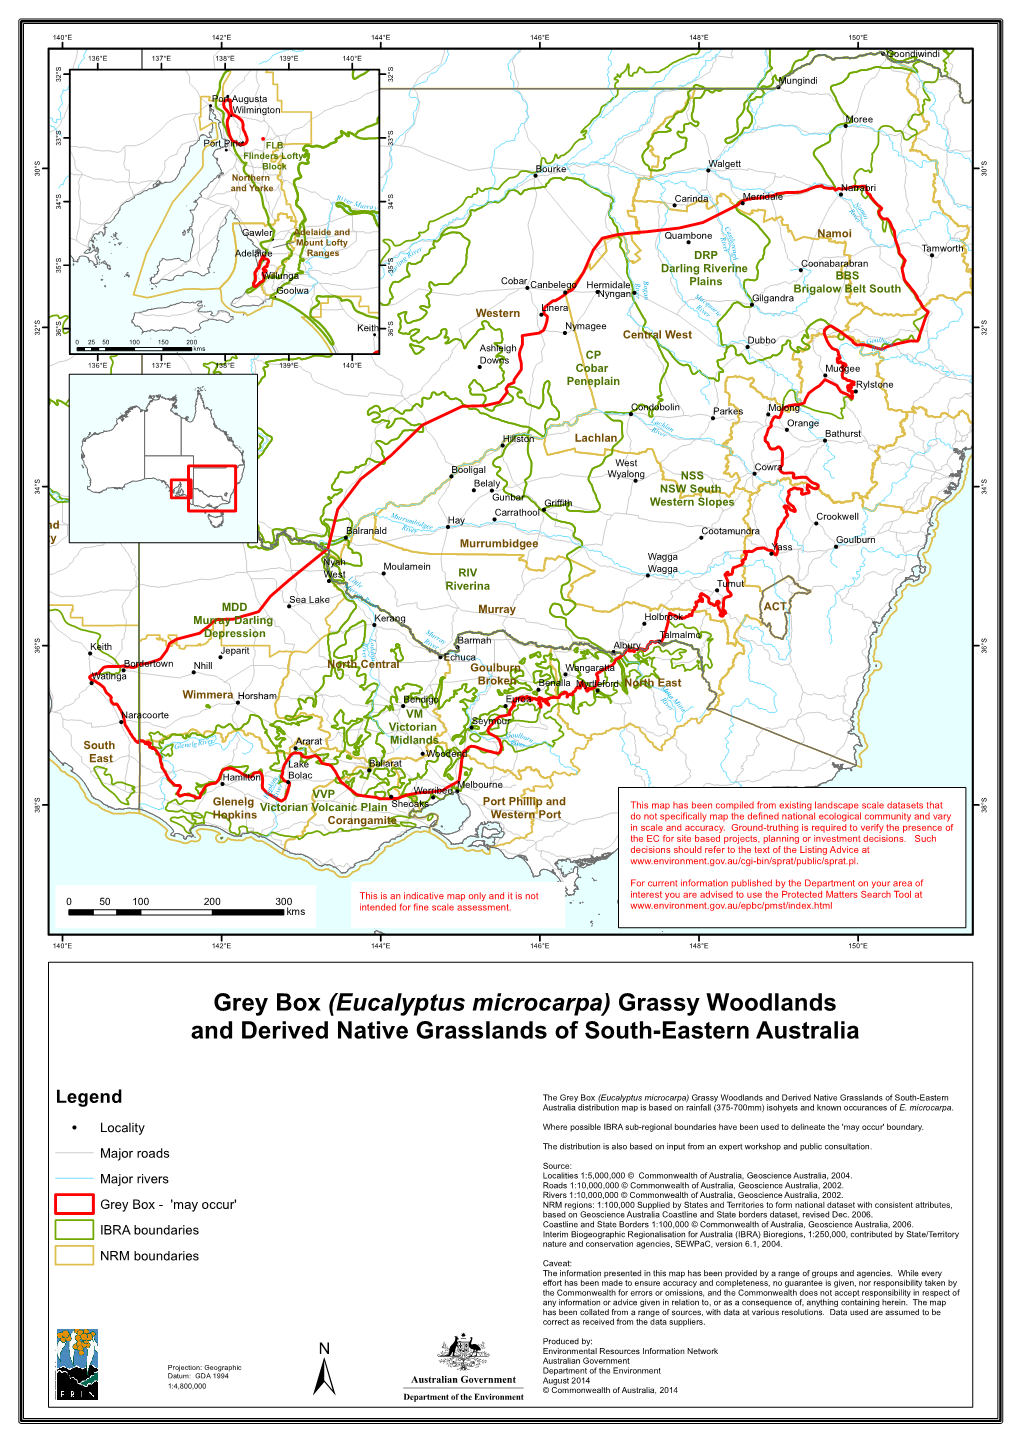 Map of Grey Box (Eucalyptus Microcarpa) Grassy Woodlands and Derived Native Grasslands of South-Eastern Australia